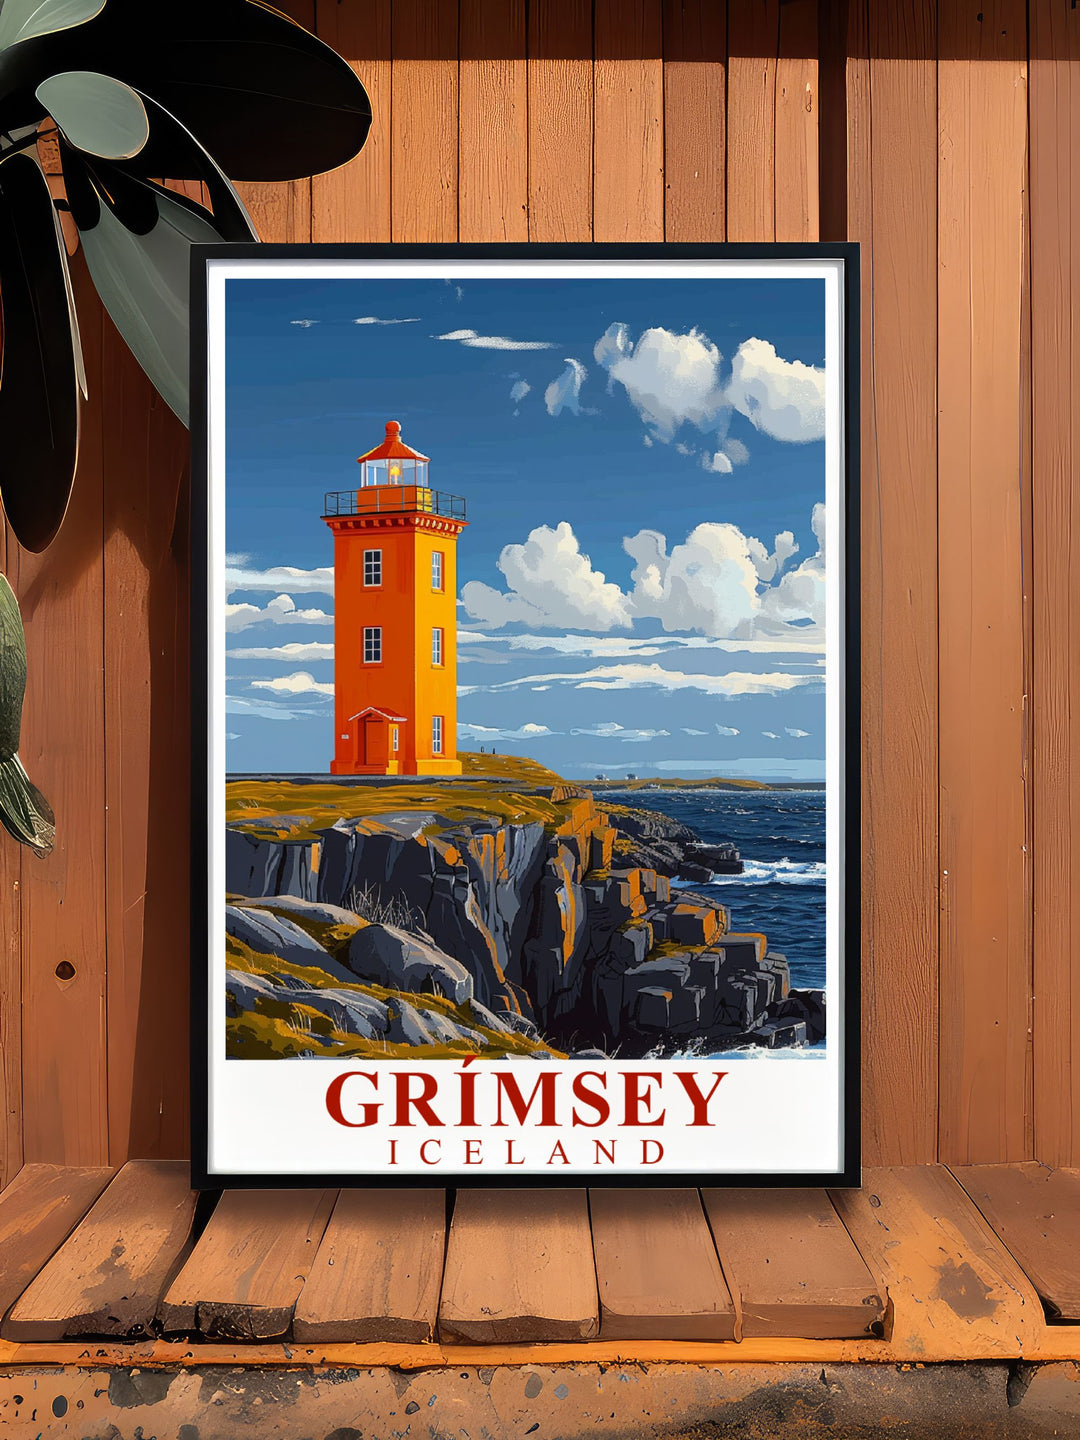 Highlighting the iconic Grímsey Lighthouse, this art print showcases the historic structure against the rugged landscape of North Iceland, ideal for those who appreciate maritime history.